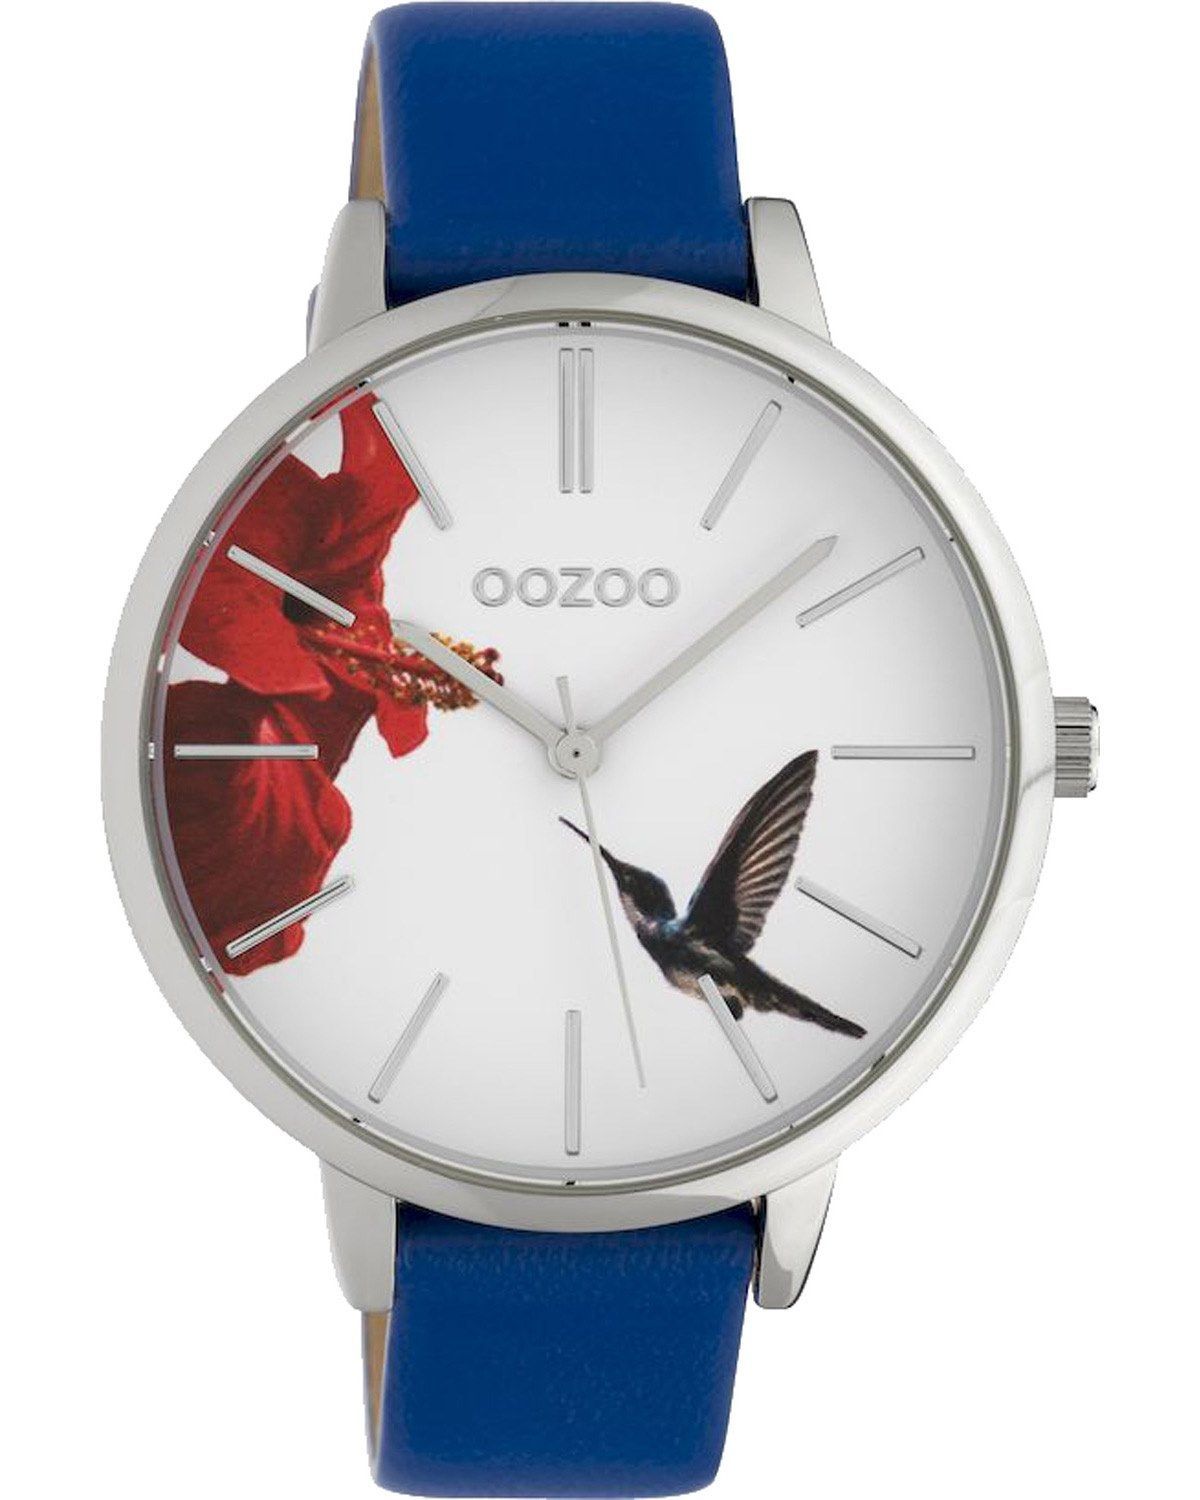 OOZOO Timepieces Limited Blue Leather Strap C10183